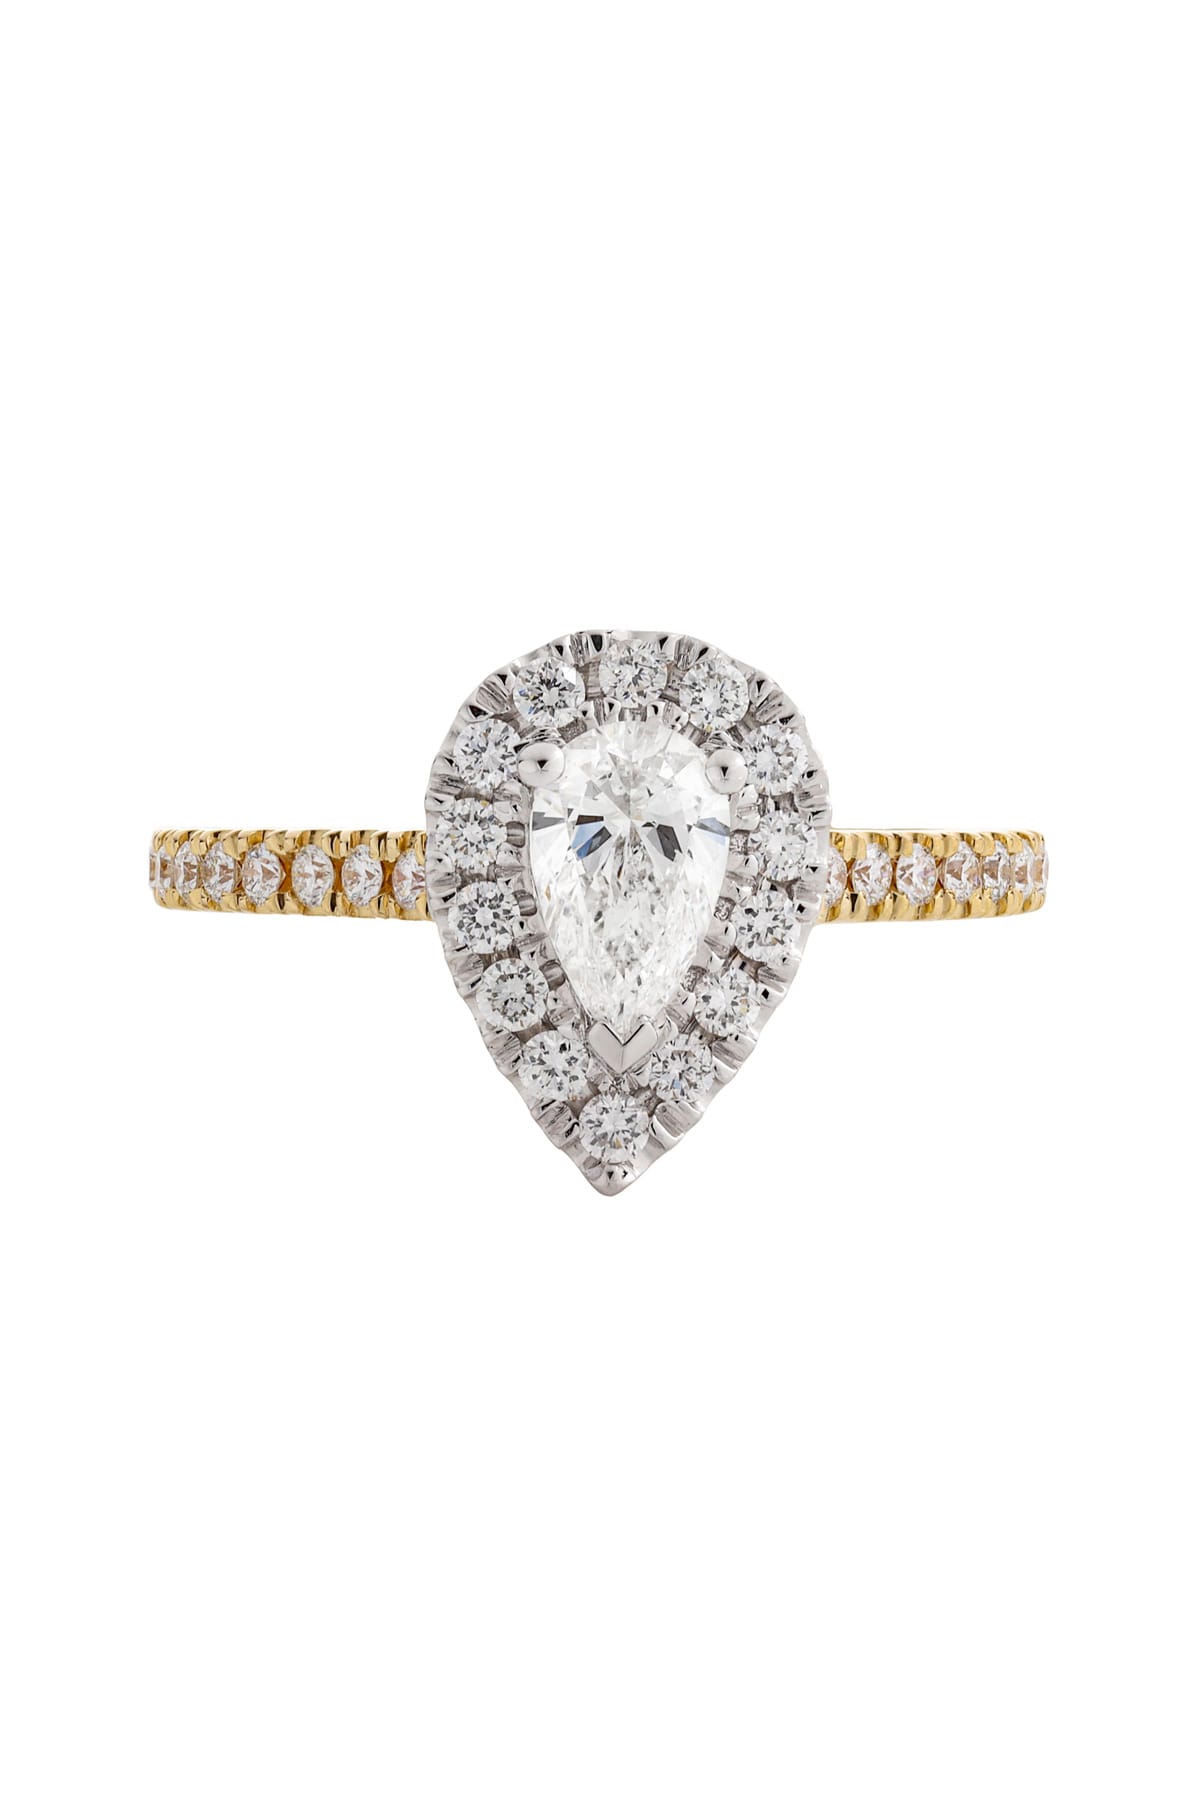 Kwiat | Engagement Ring with an East-West Pear Shape Diamond in Platinum -  Kwiat